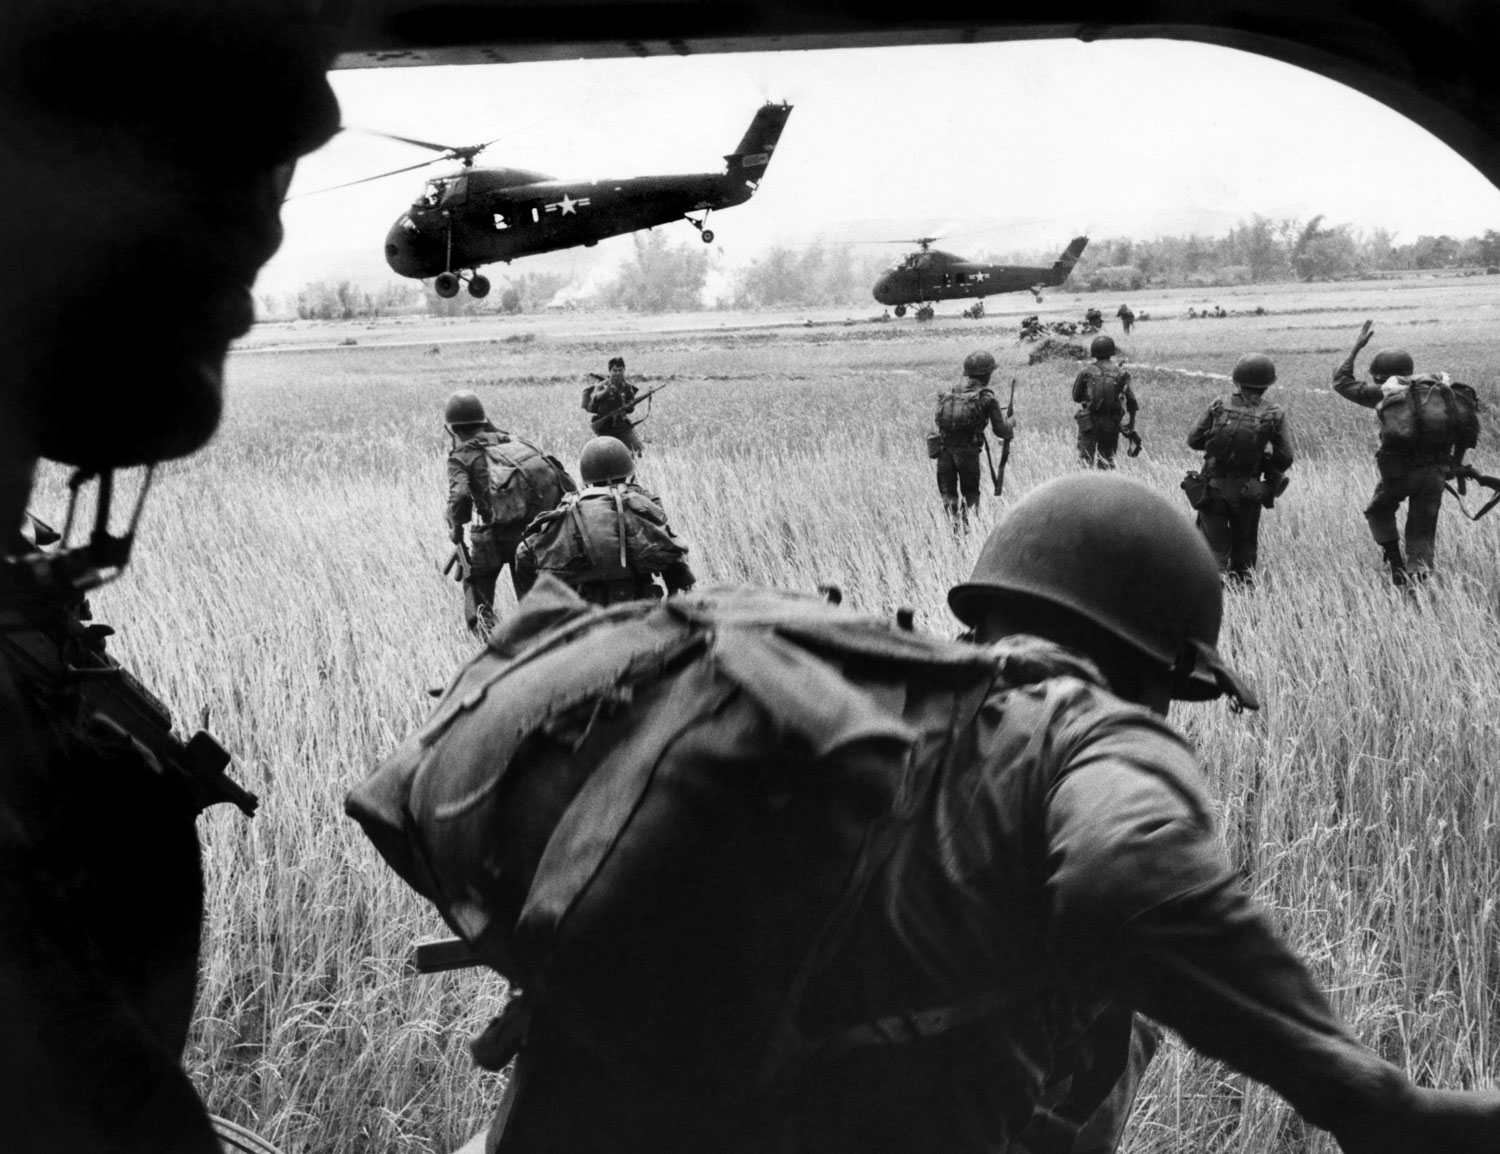 The view from inside Marine helicopter Yankee Papa 13, Vietnam, March 1965.